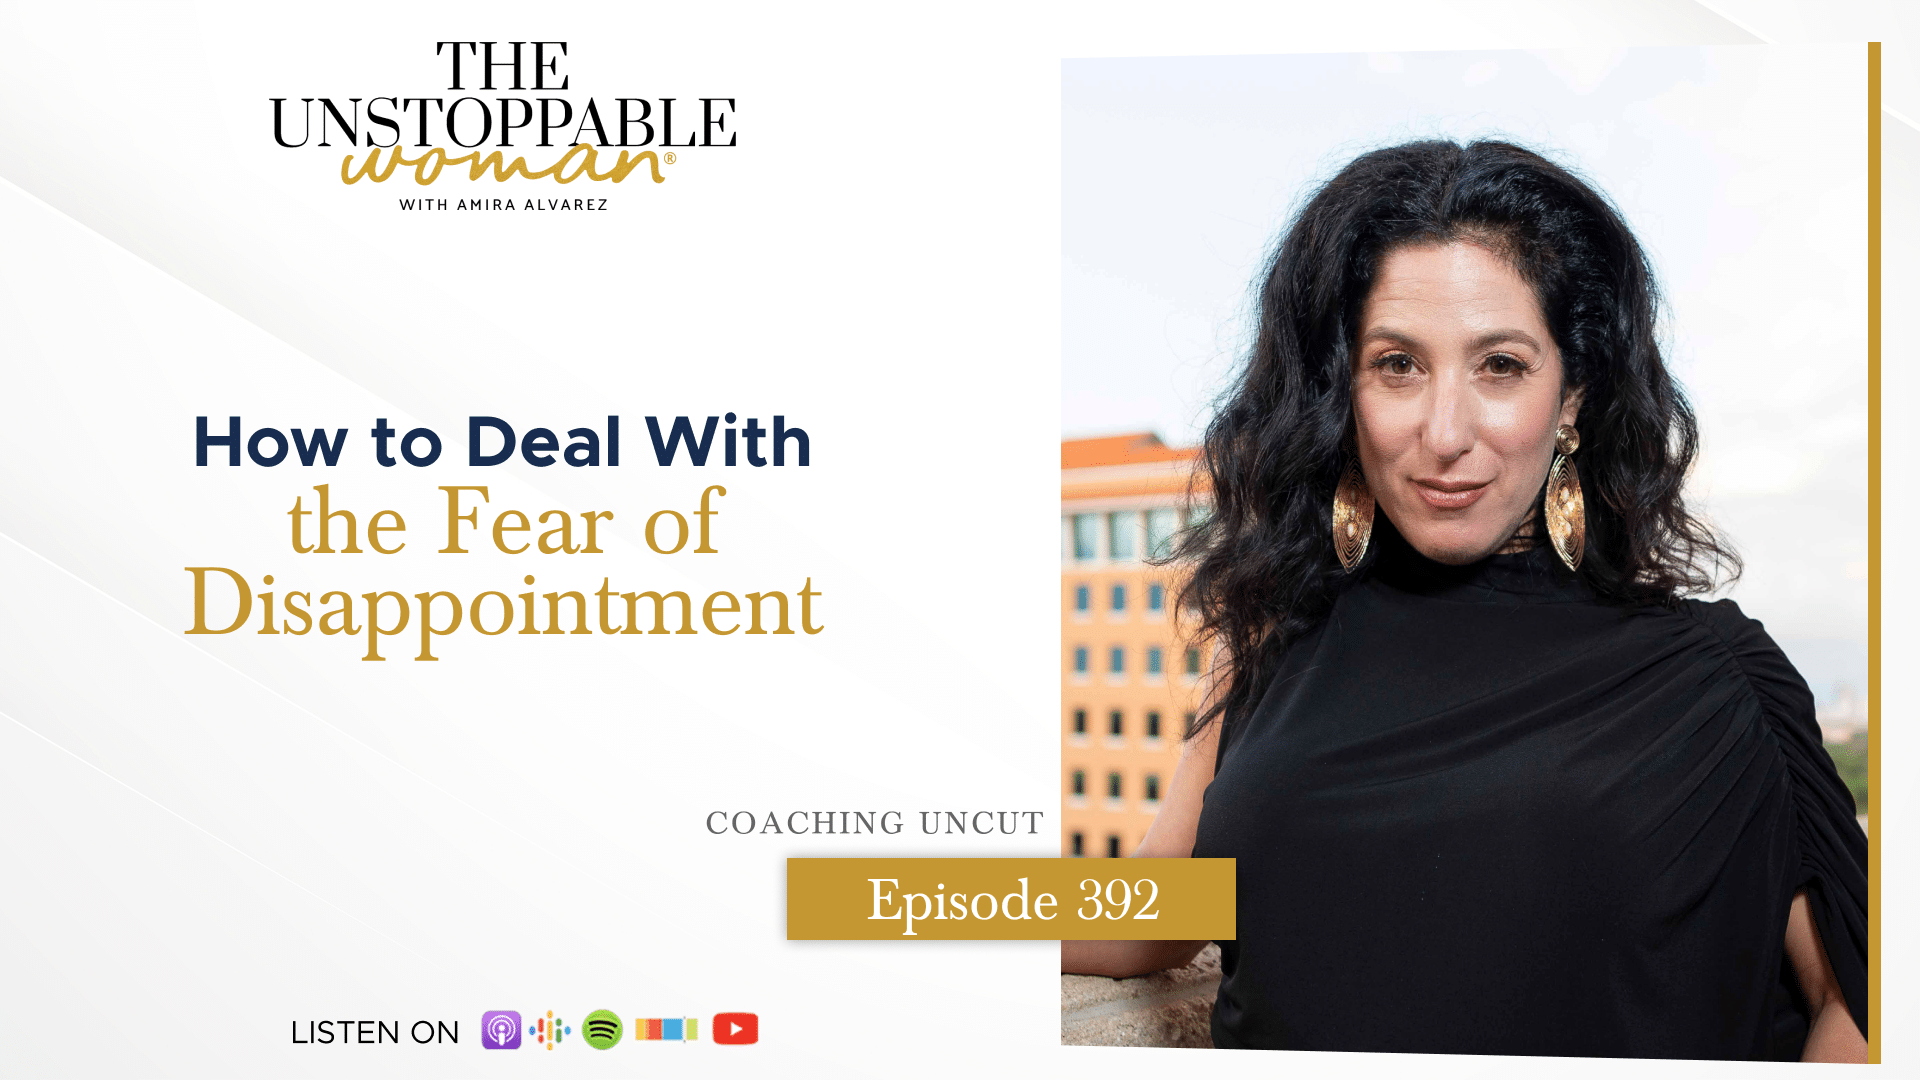 [Image: How to Deal With the Fear of Disappointment]